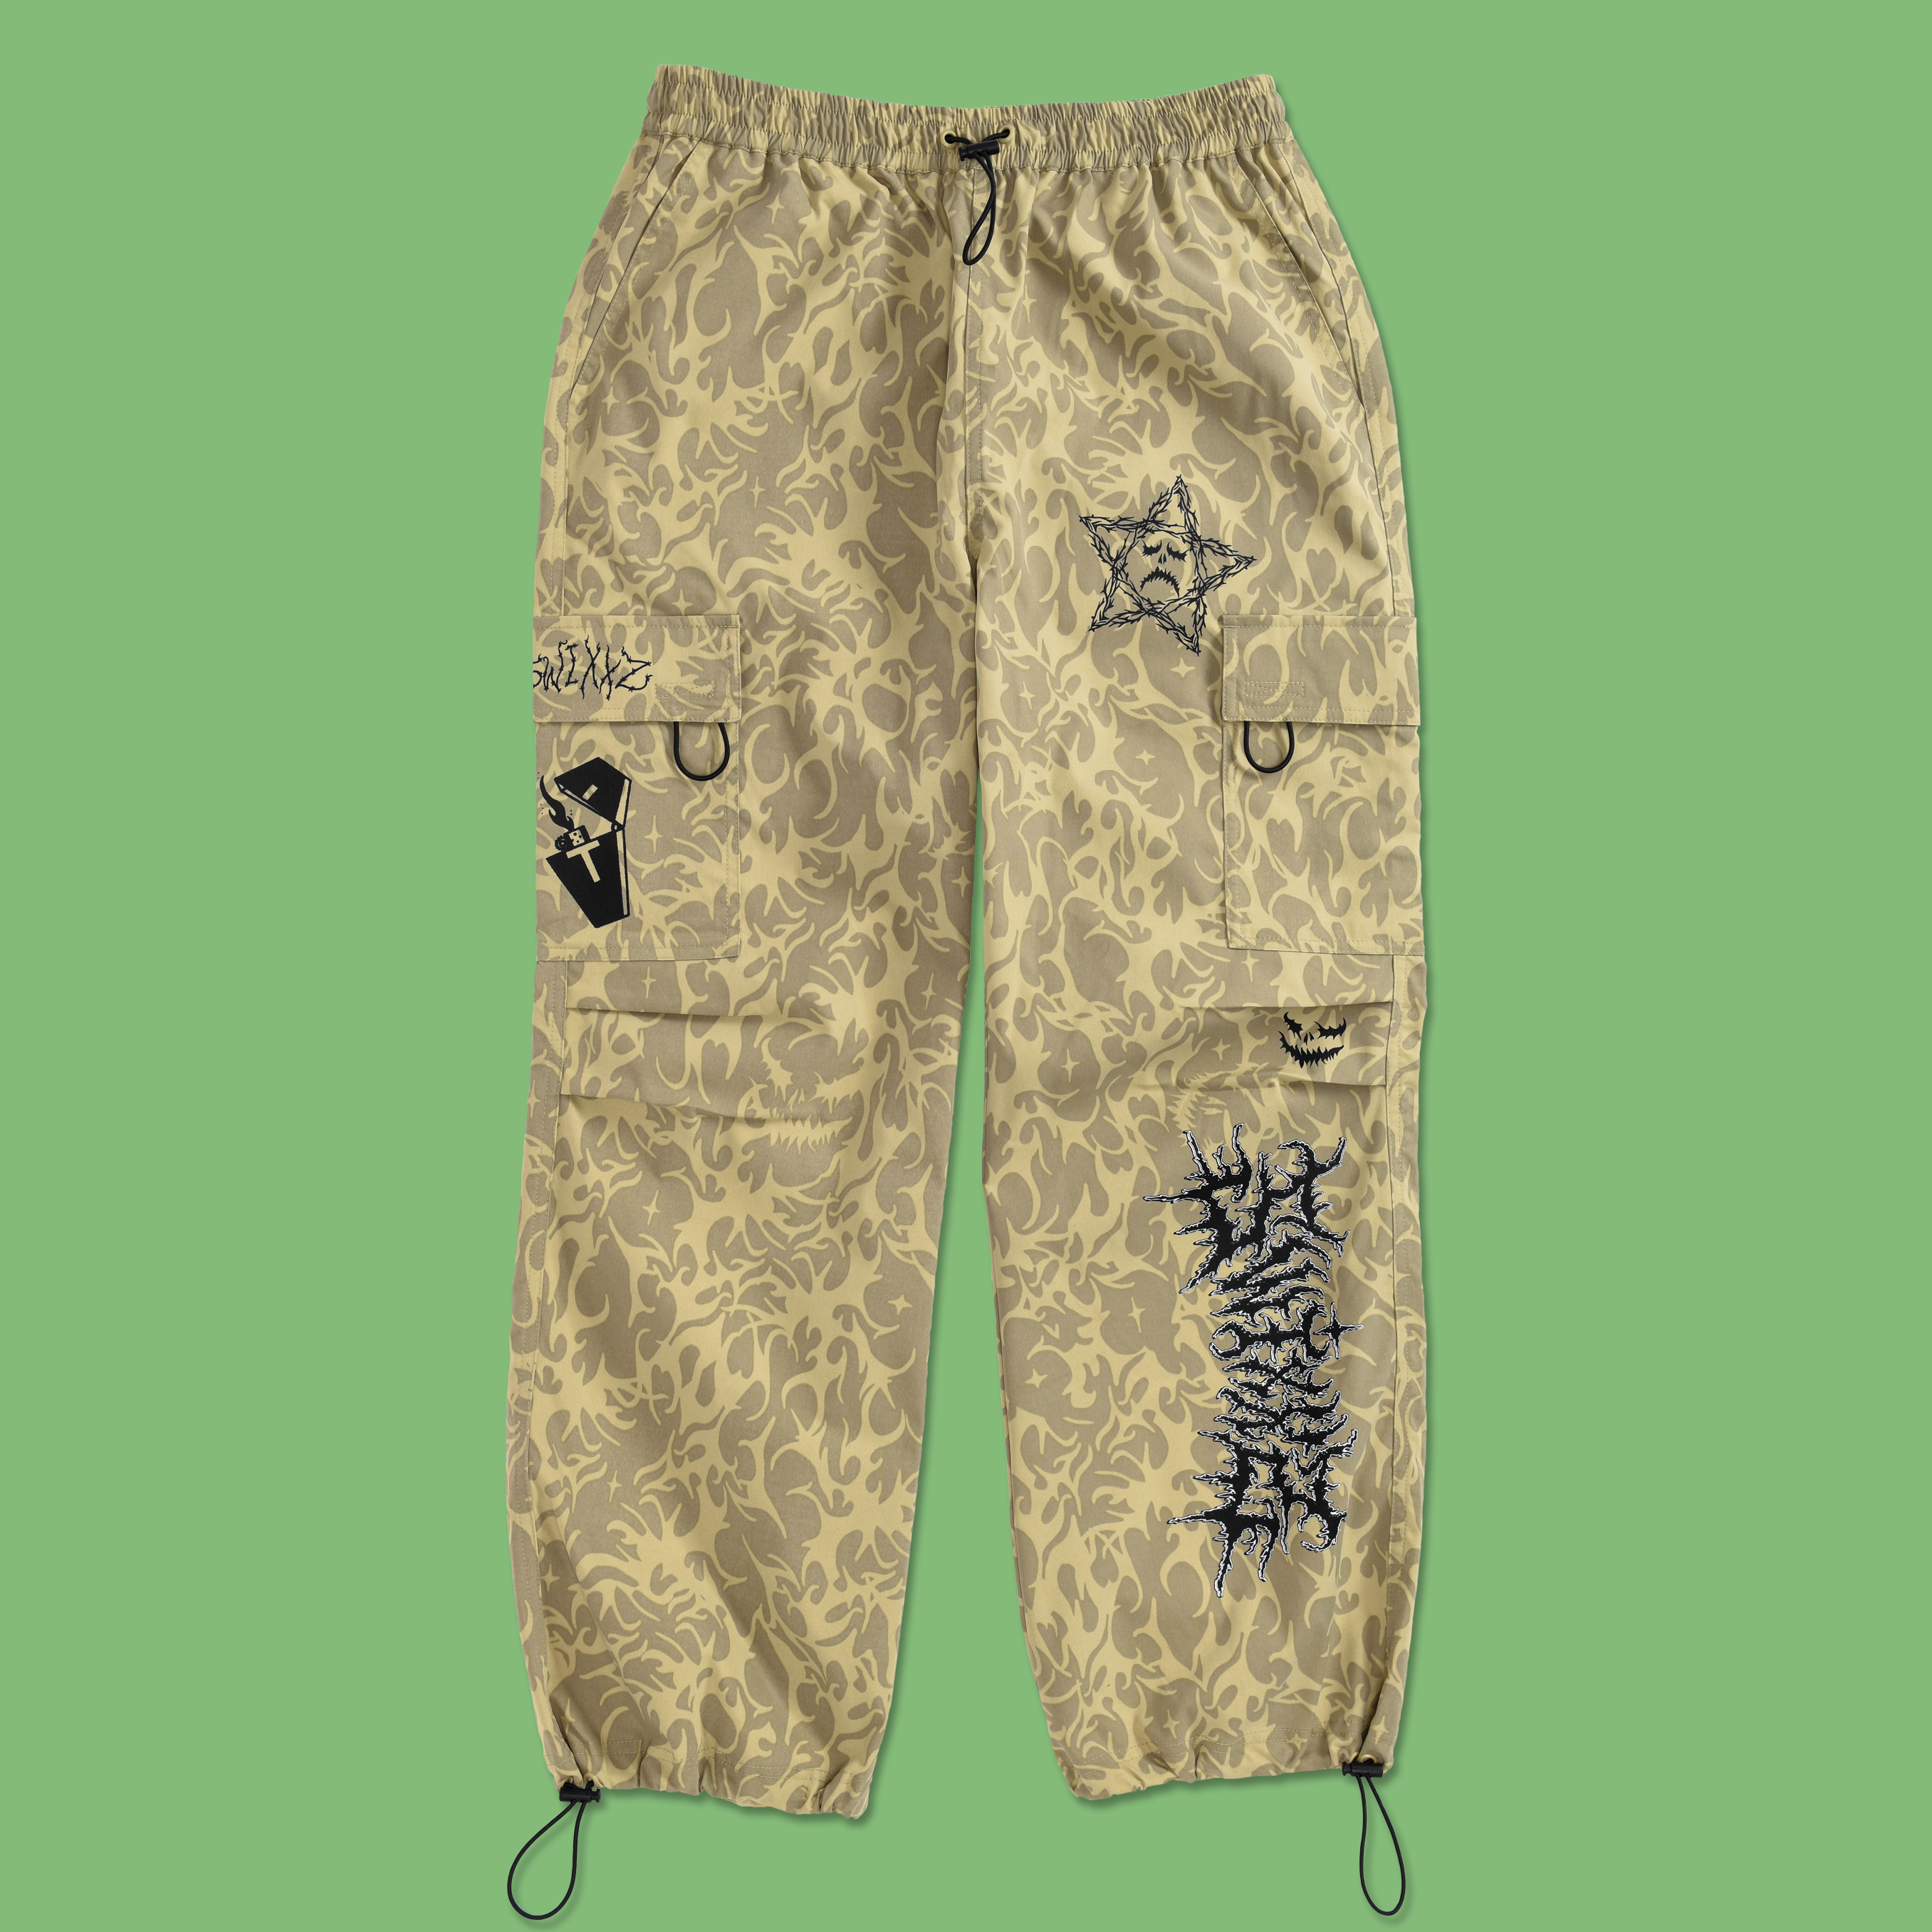 Creepy Parachute Pants from SWIXXZ by Maggie Lindemann - Front